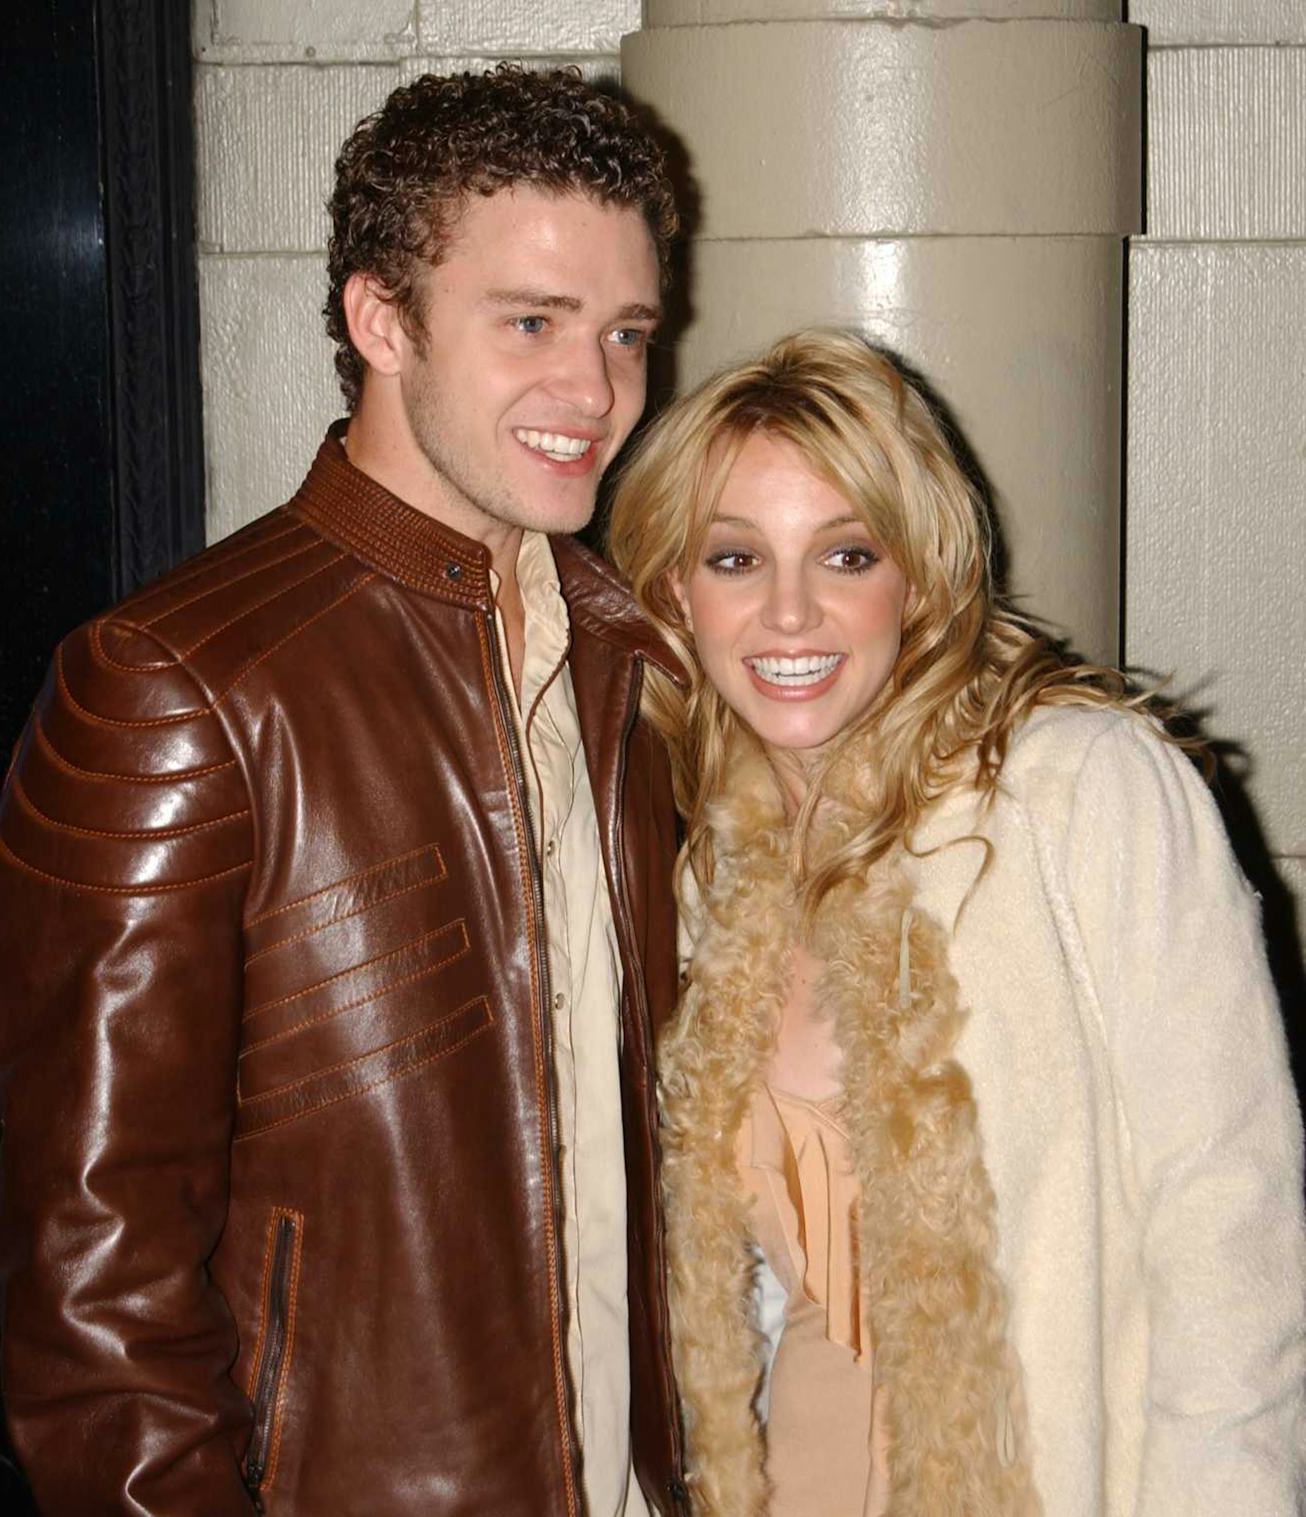 396961 02: (ITALY OUT) Singer Britney Spears and her boyfriend Justin Timberlake attend the Britney ...